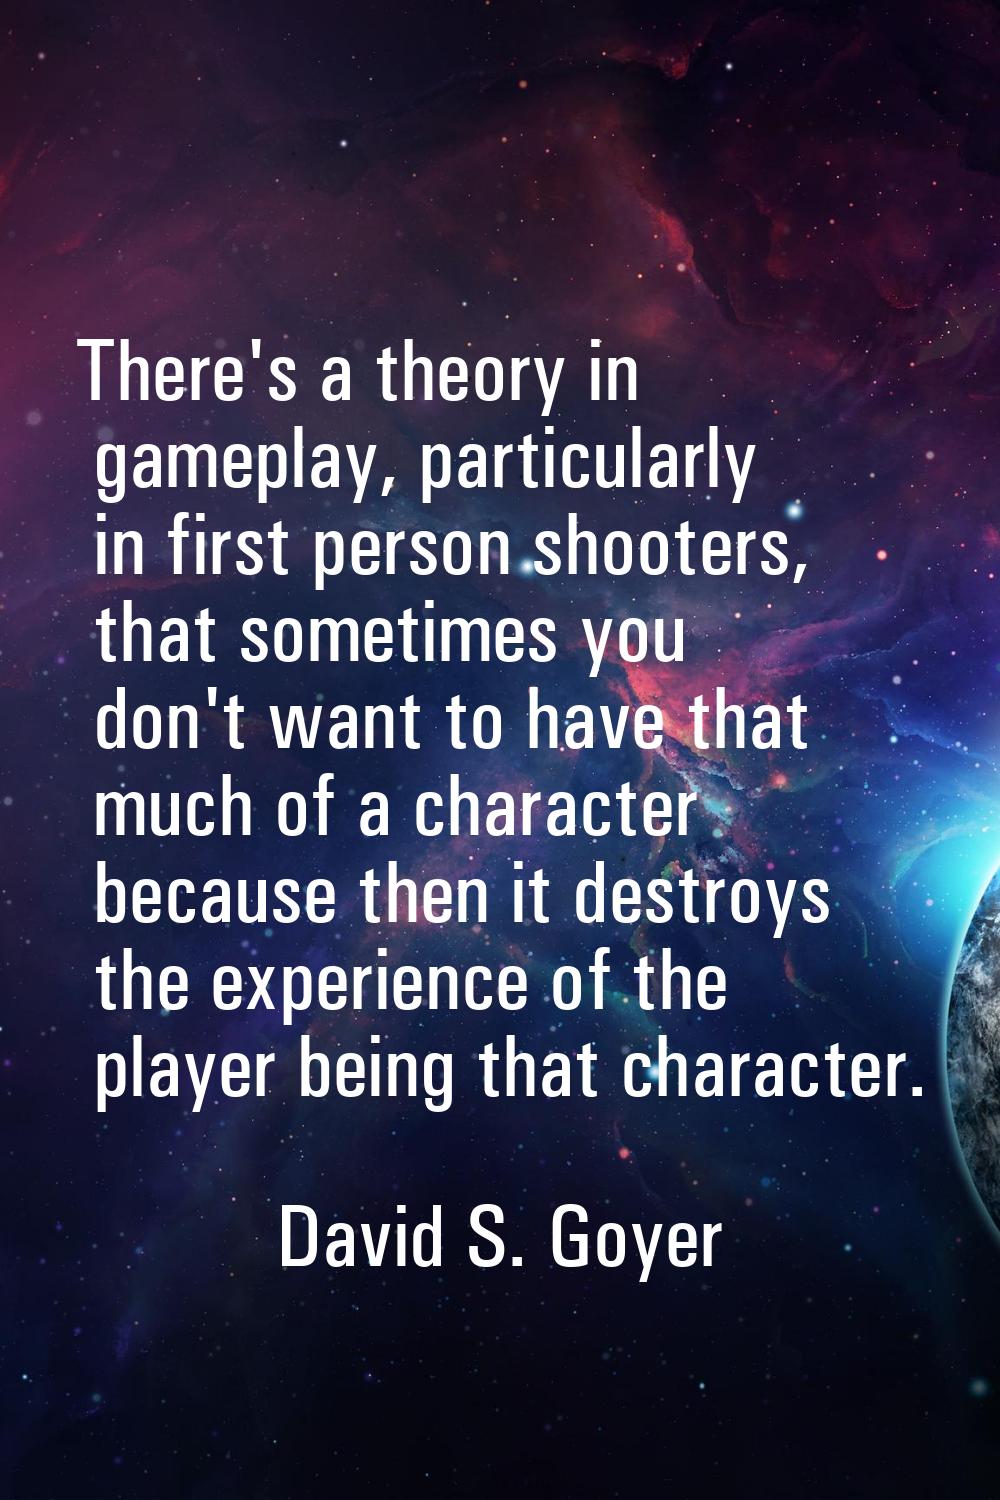 There's a theory in gameplay, particularly in first person shooters, that sometimes you don't want 